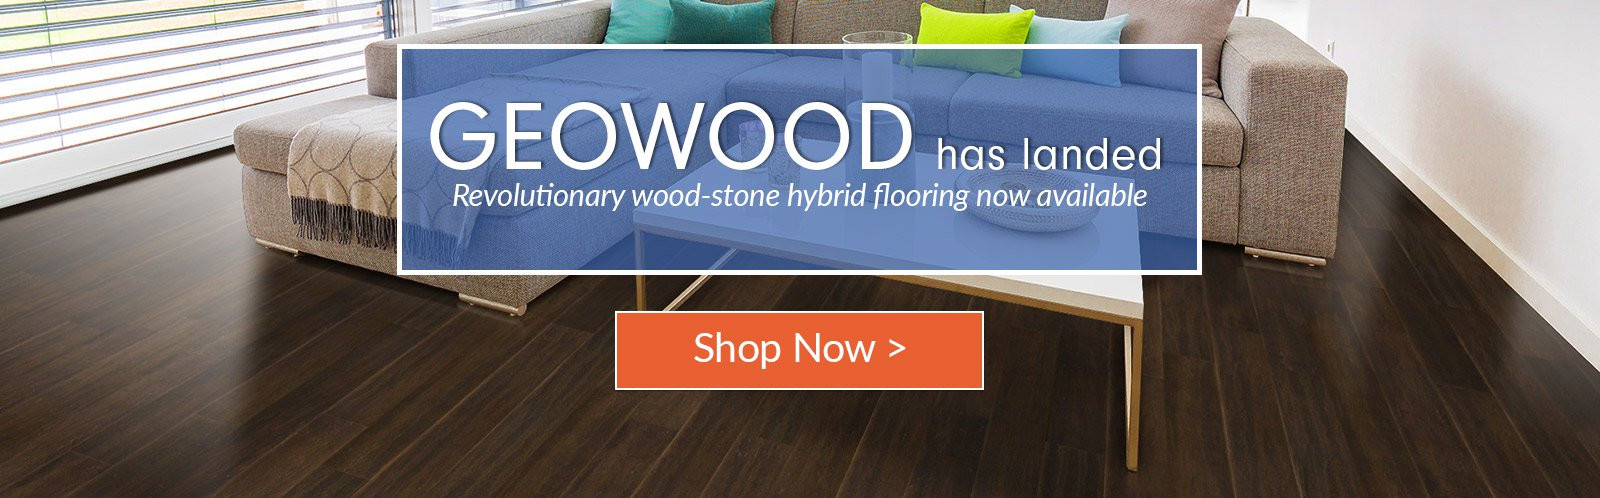 21 Popular Hardwood Floor Installation San Jose Ca 2024 free download hardwood floor installation san jose ca of green building construction materials and home decor cali bamboo within geowood launch homepage slider